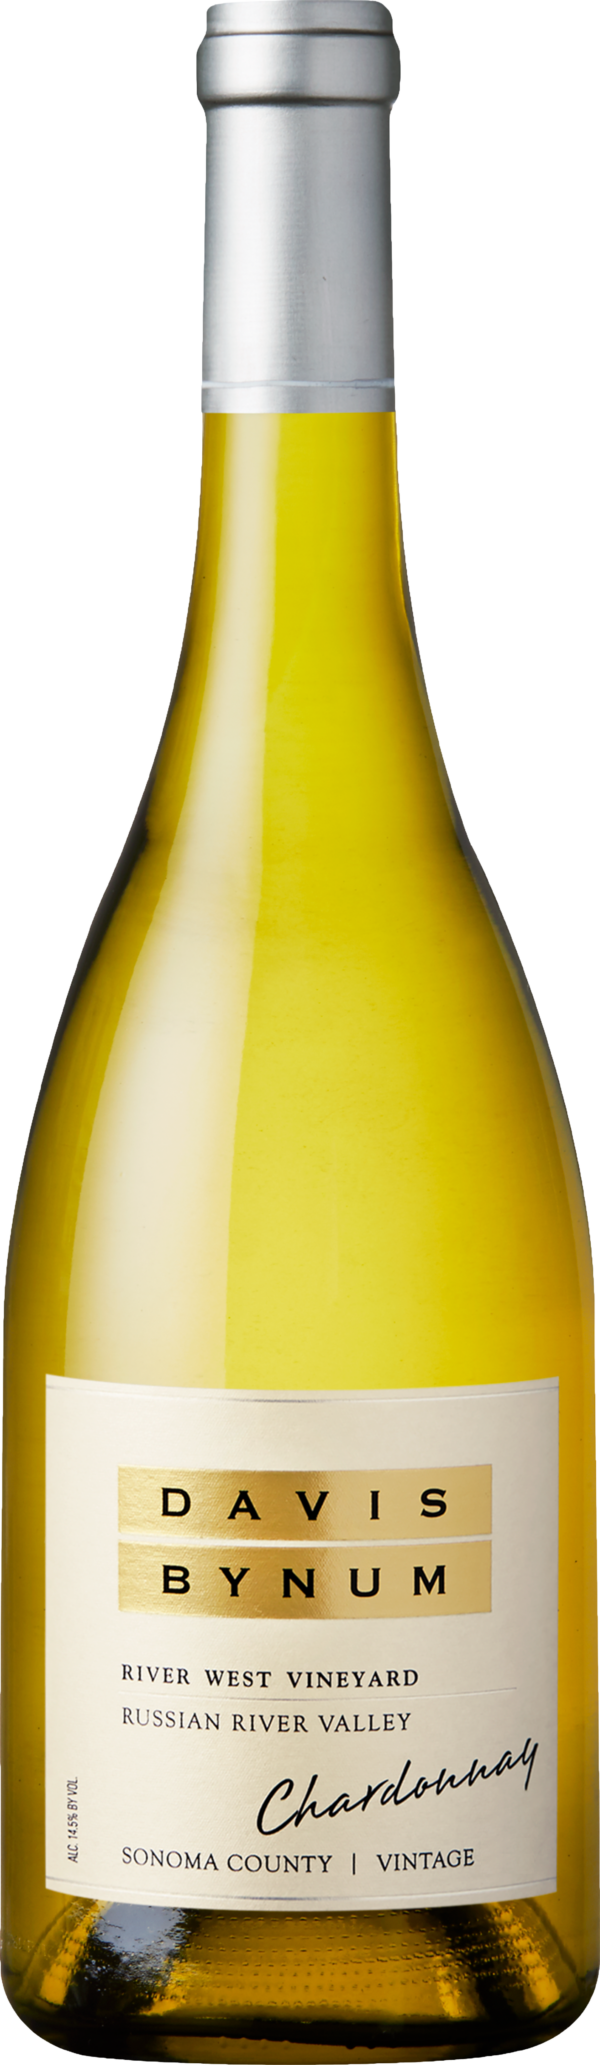 Product image of Davis Bynum River West Vineyard Chardonnay 2017 from 8wines